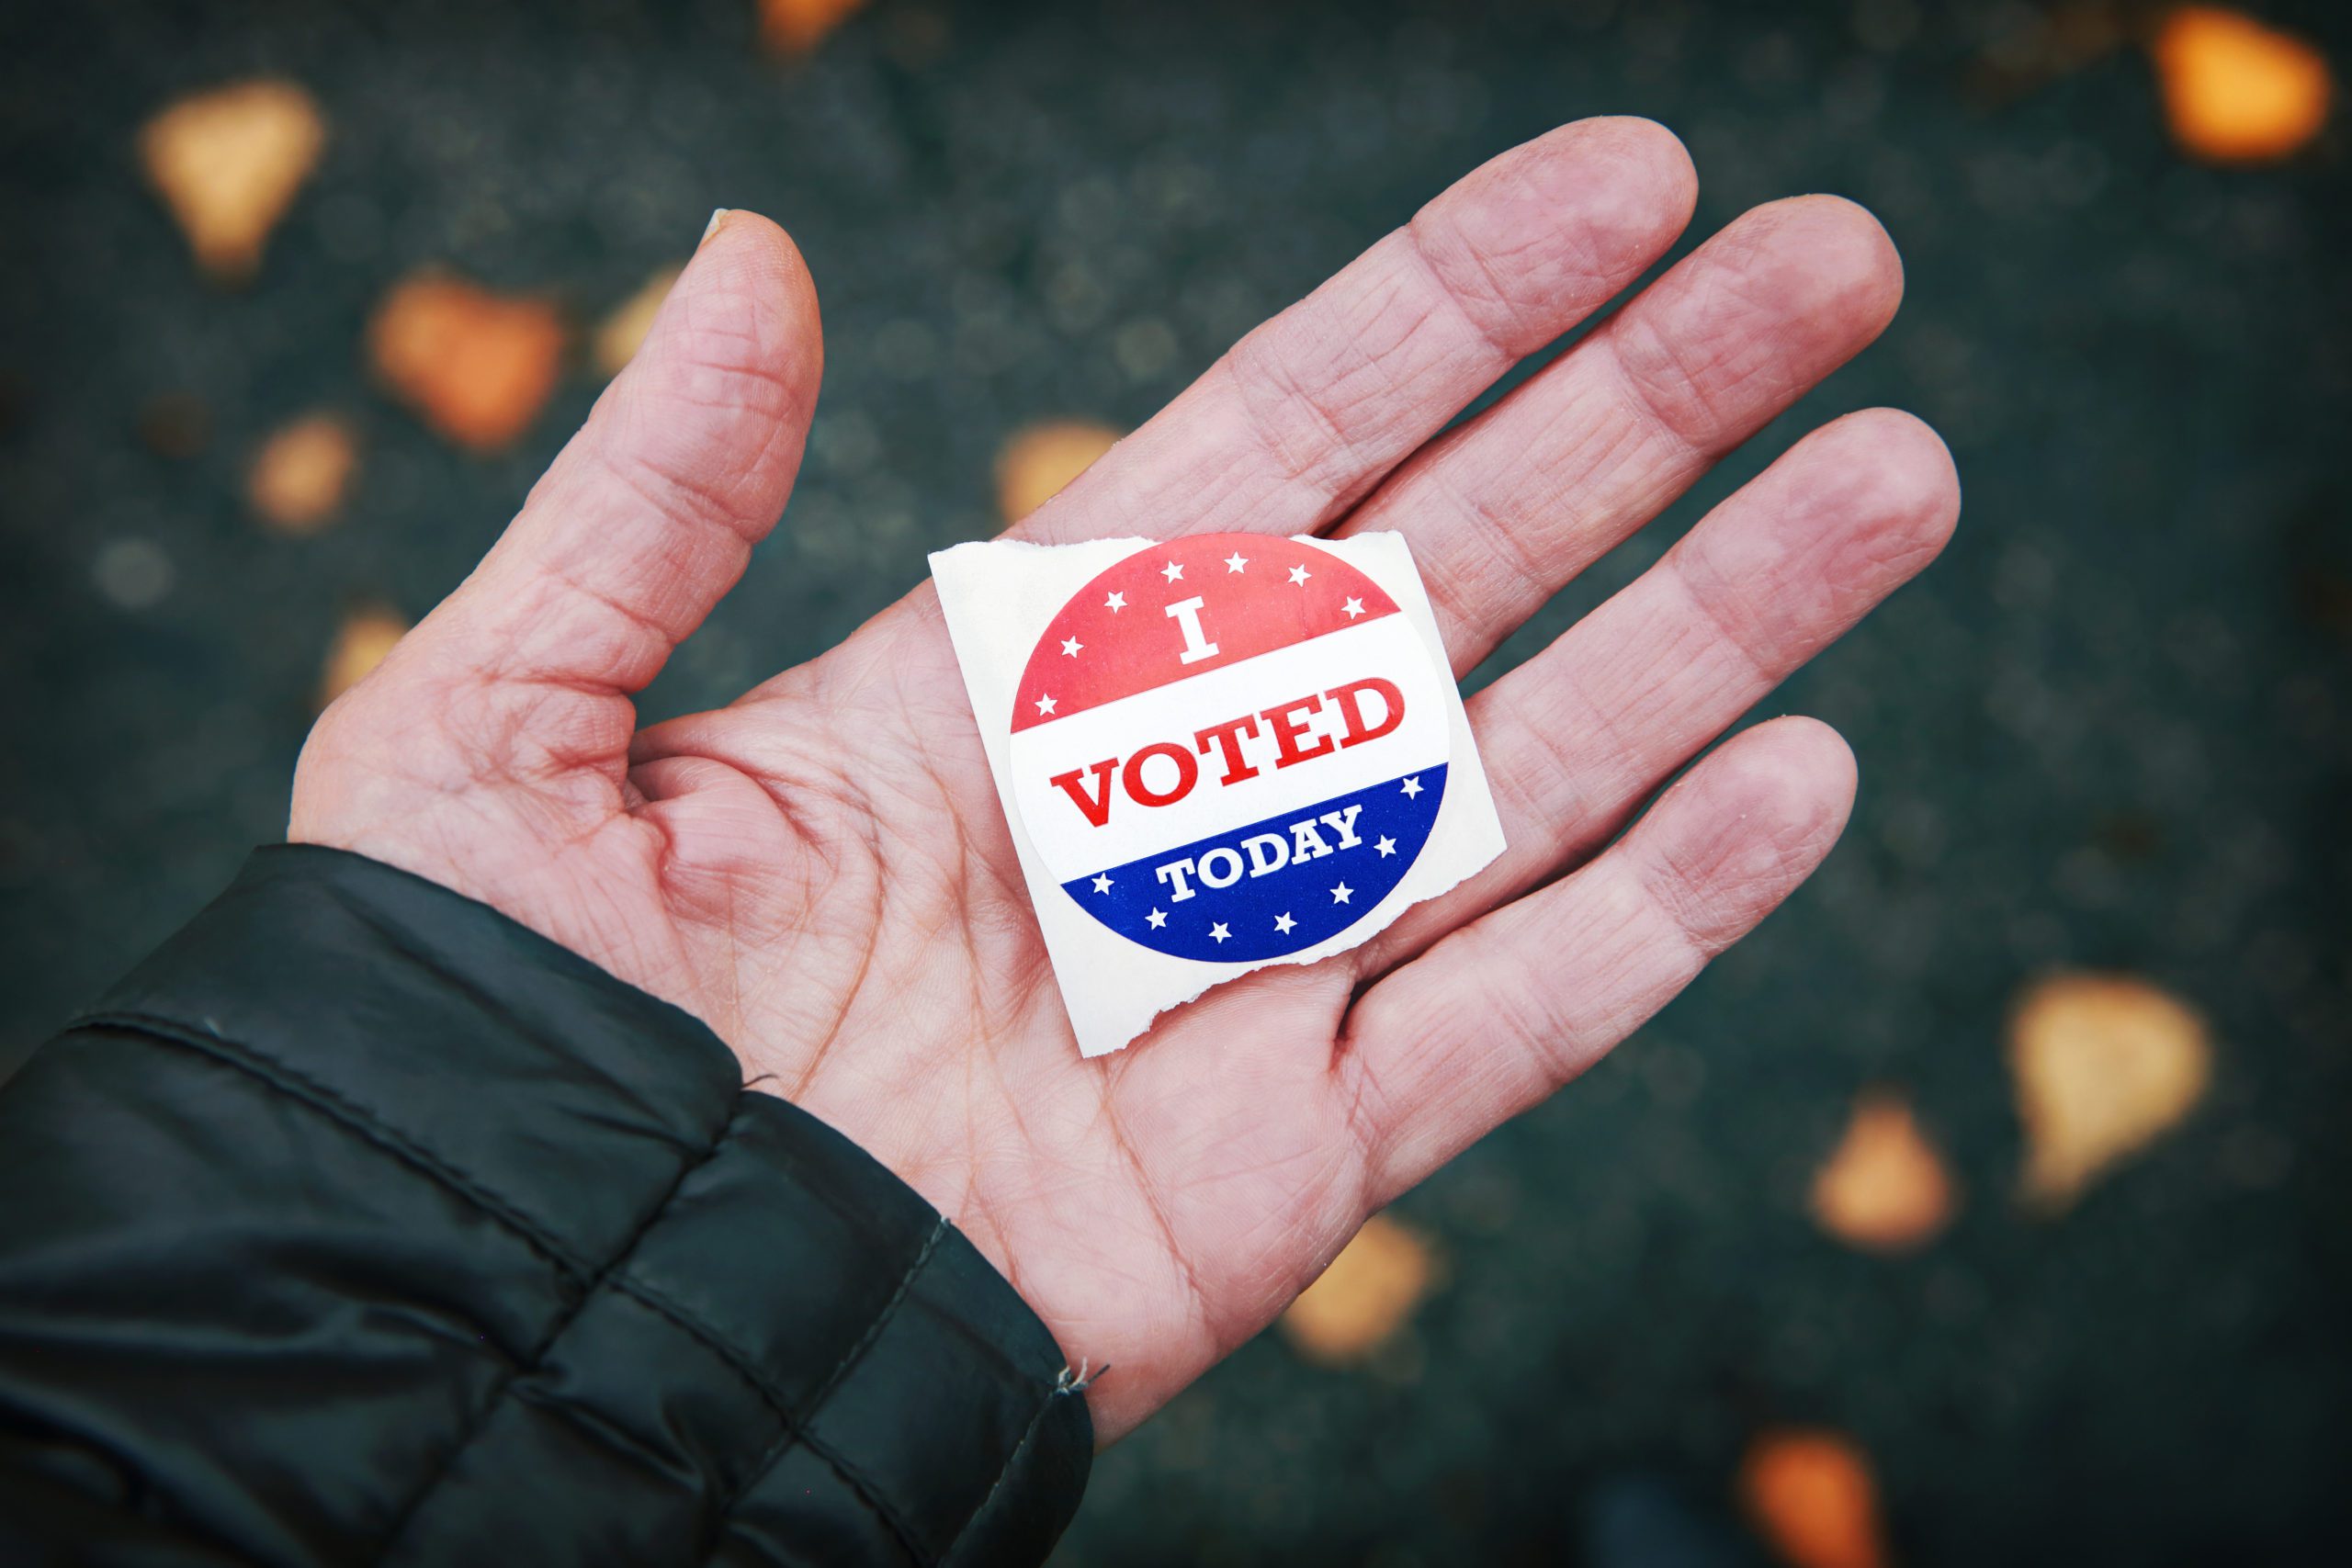 Vermilion County Election Day (April 6) Polling Locations